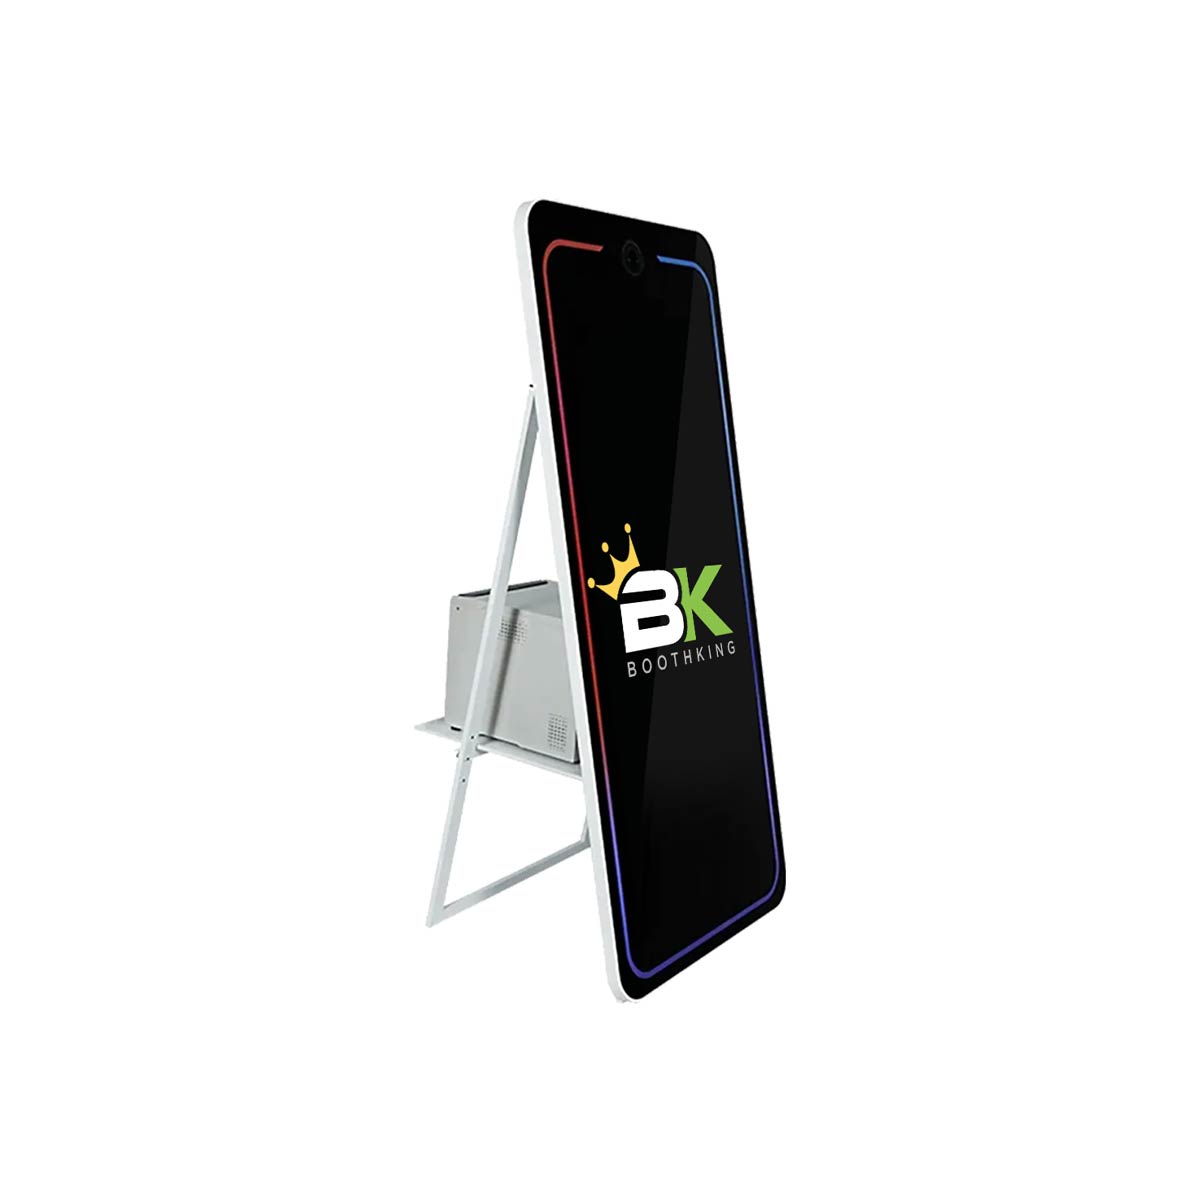 mirror photo booths - Enhance Your Photography Brand With A Booth King 360 Photo Booth - photo-booth-news